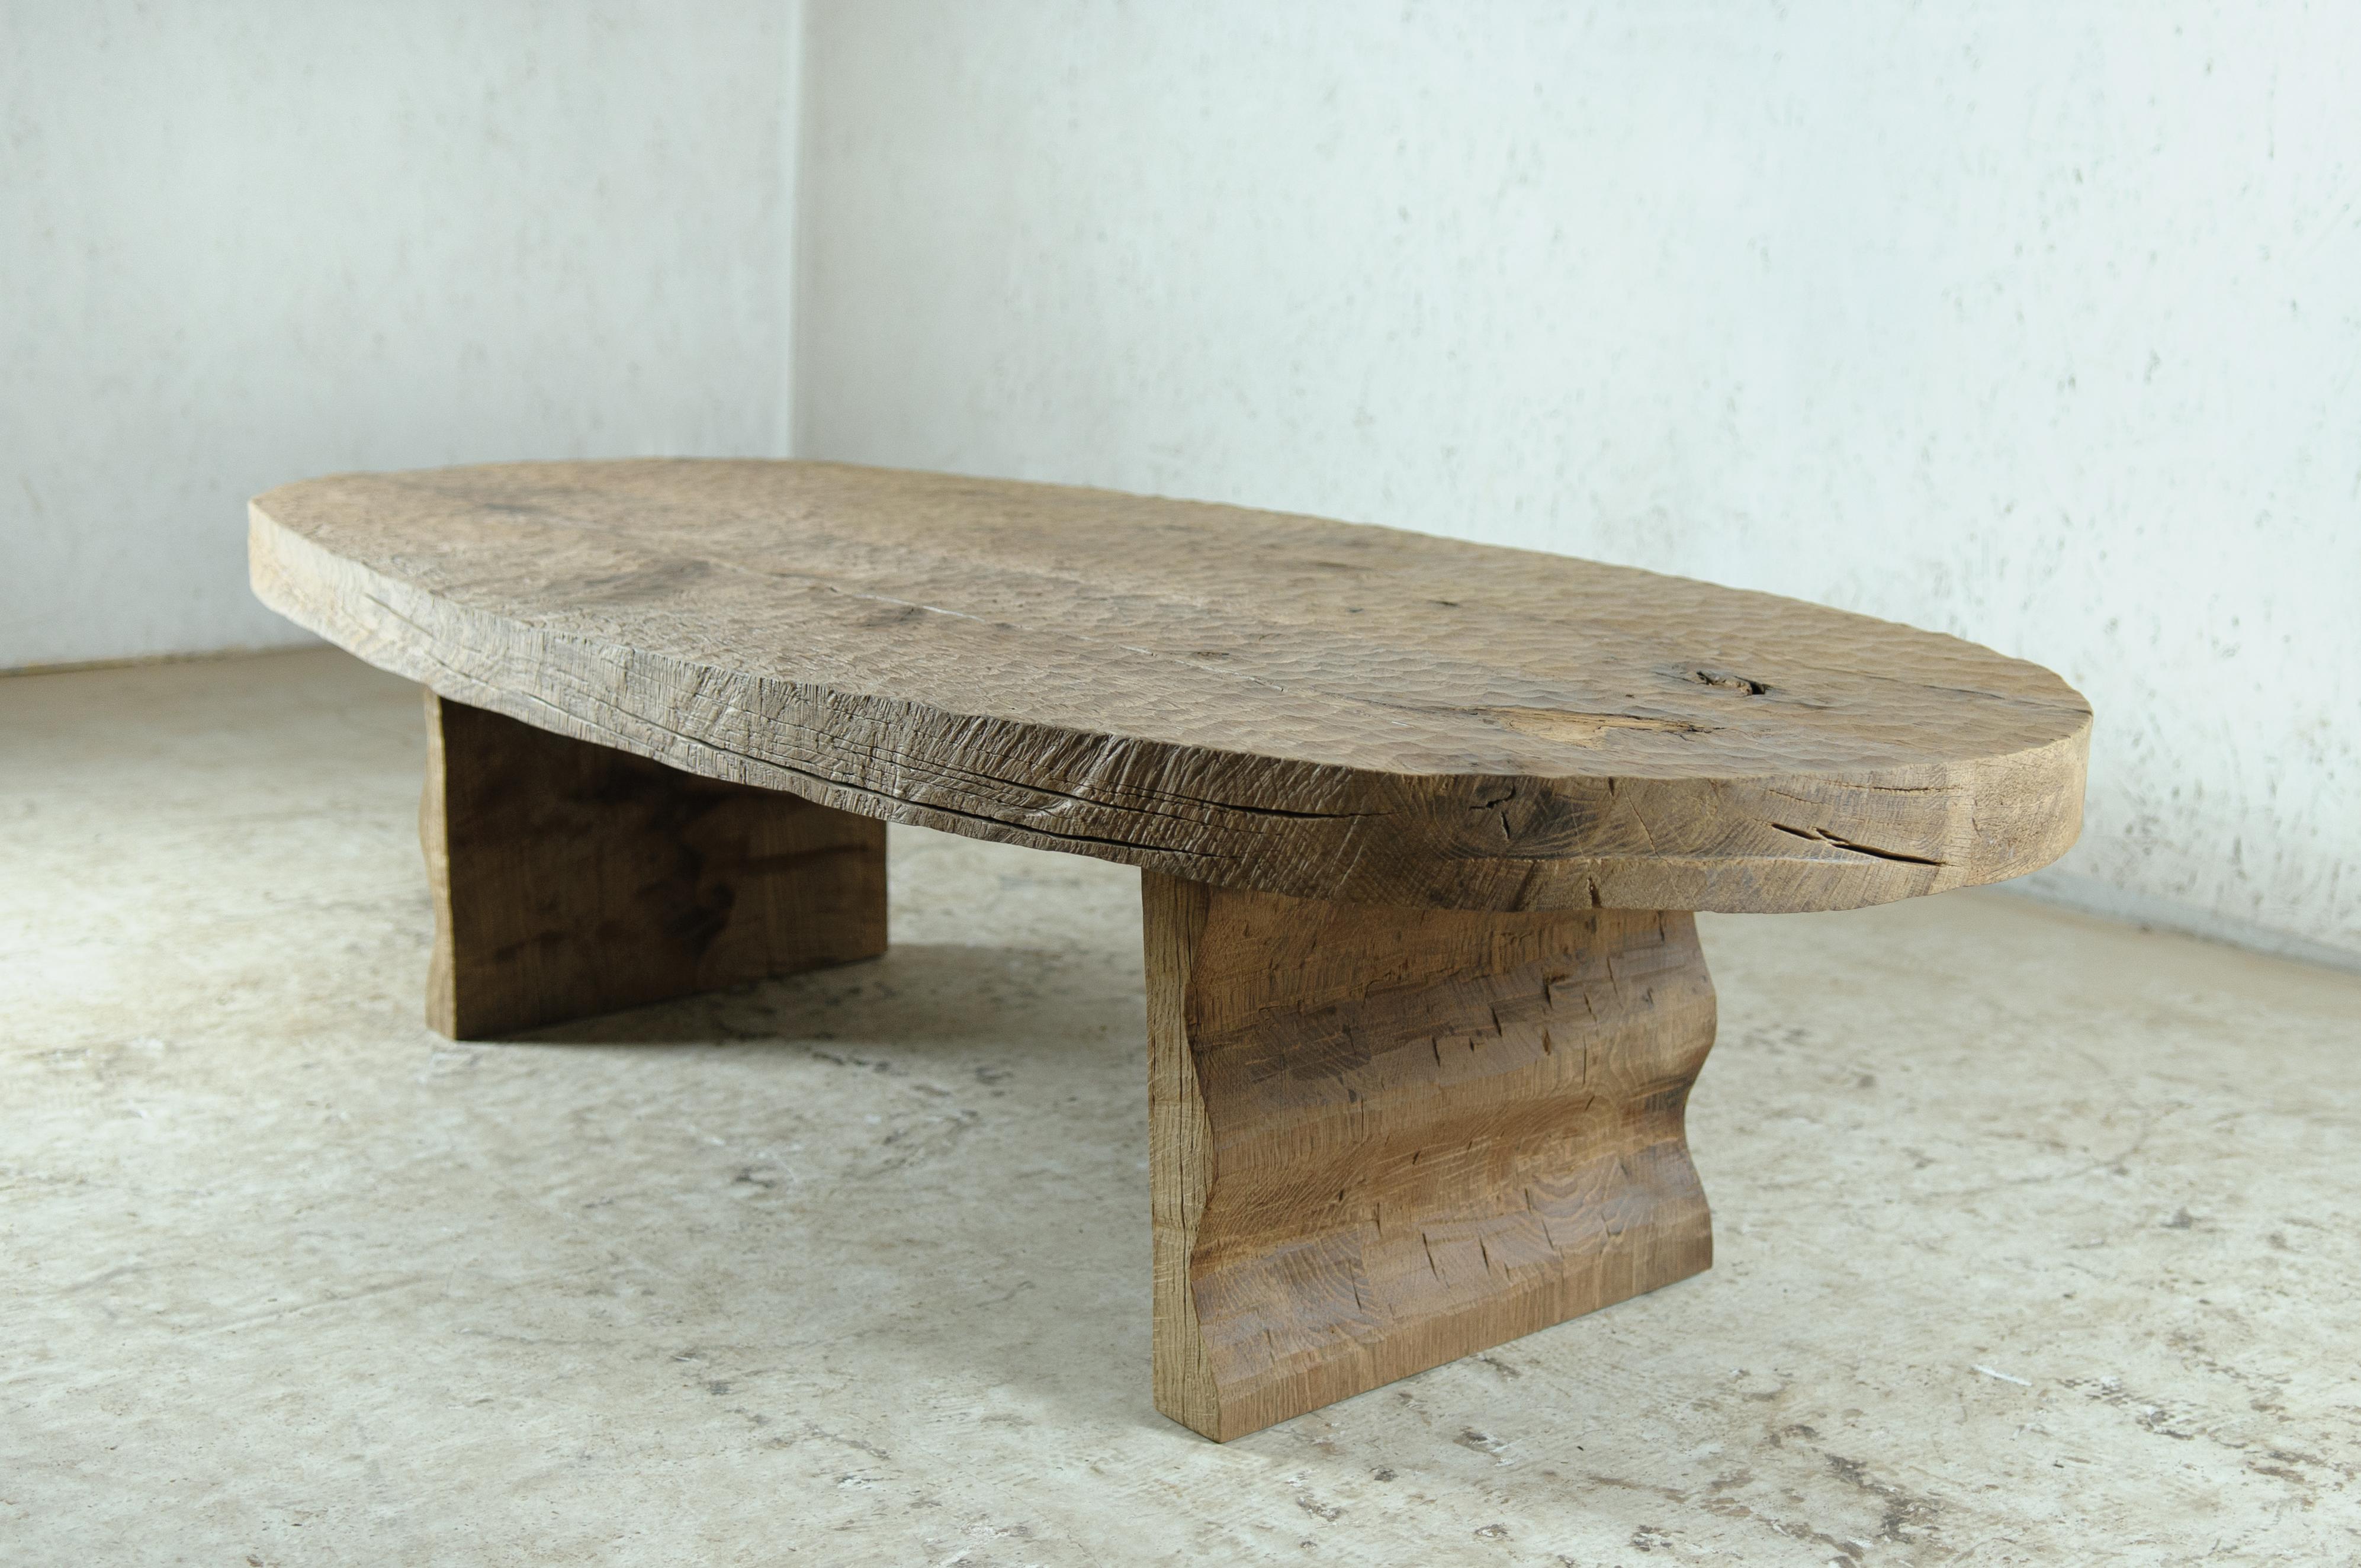 Coffe table
Sculpted wood (solid oak)
Finish: hammered, medium

[Suitable for outdoor use]

SÓHA design studio conceives and produces furniture design and decorative objects in solid oak in an authentic style. Inspiration to create all these items